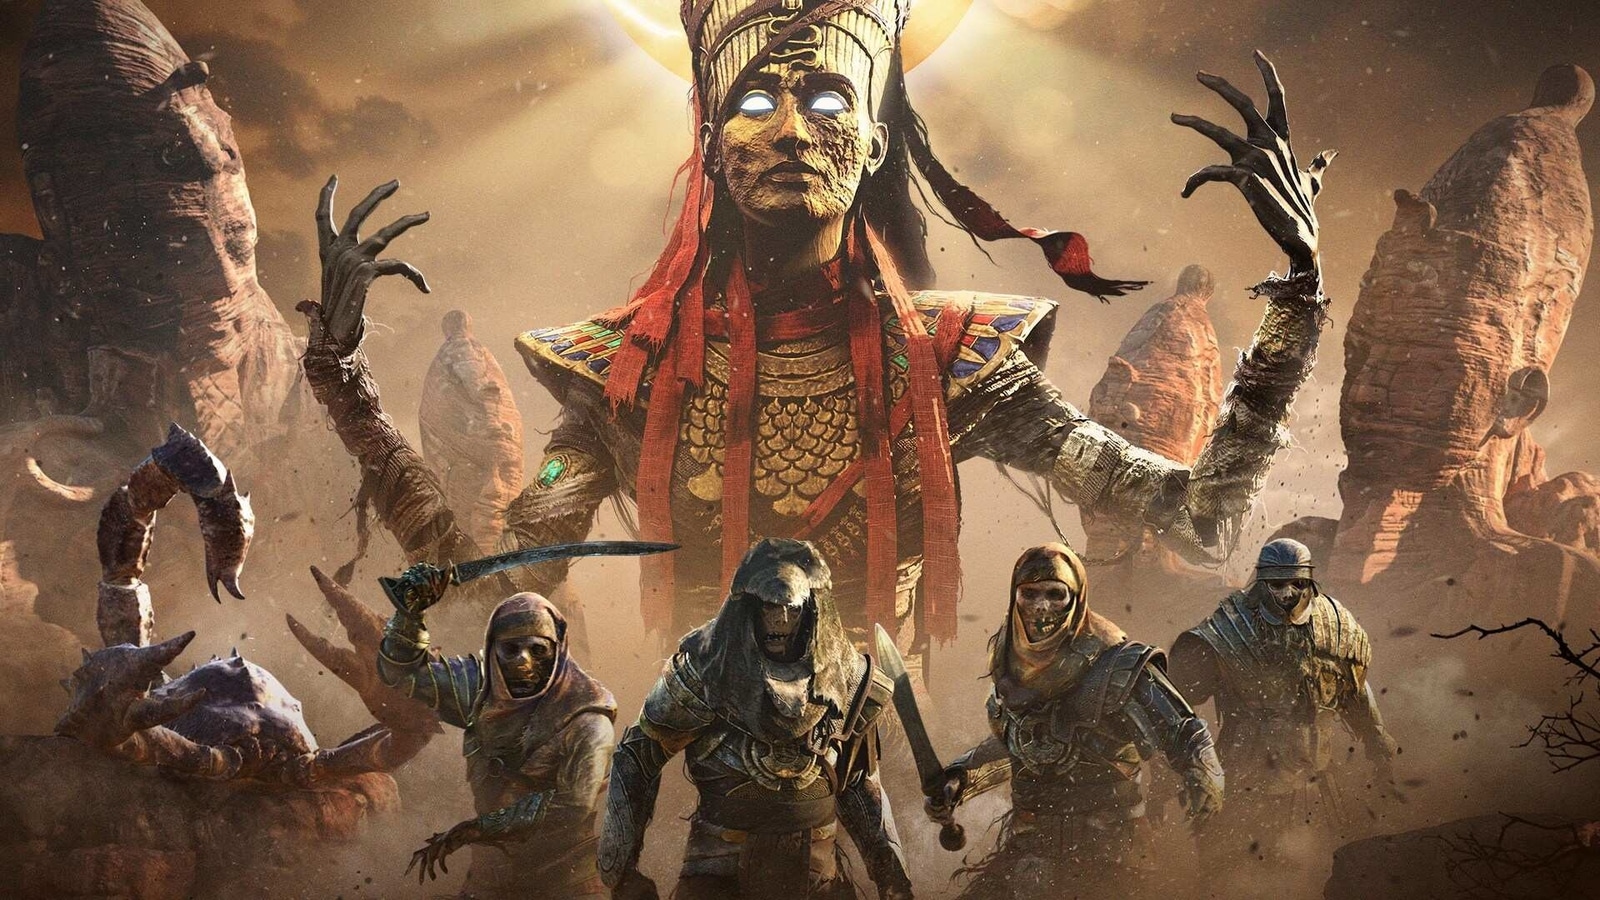 Assassin's Creed: Origins is free to play for limited time - Times of India